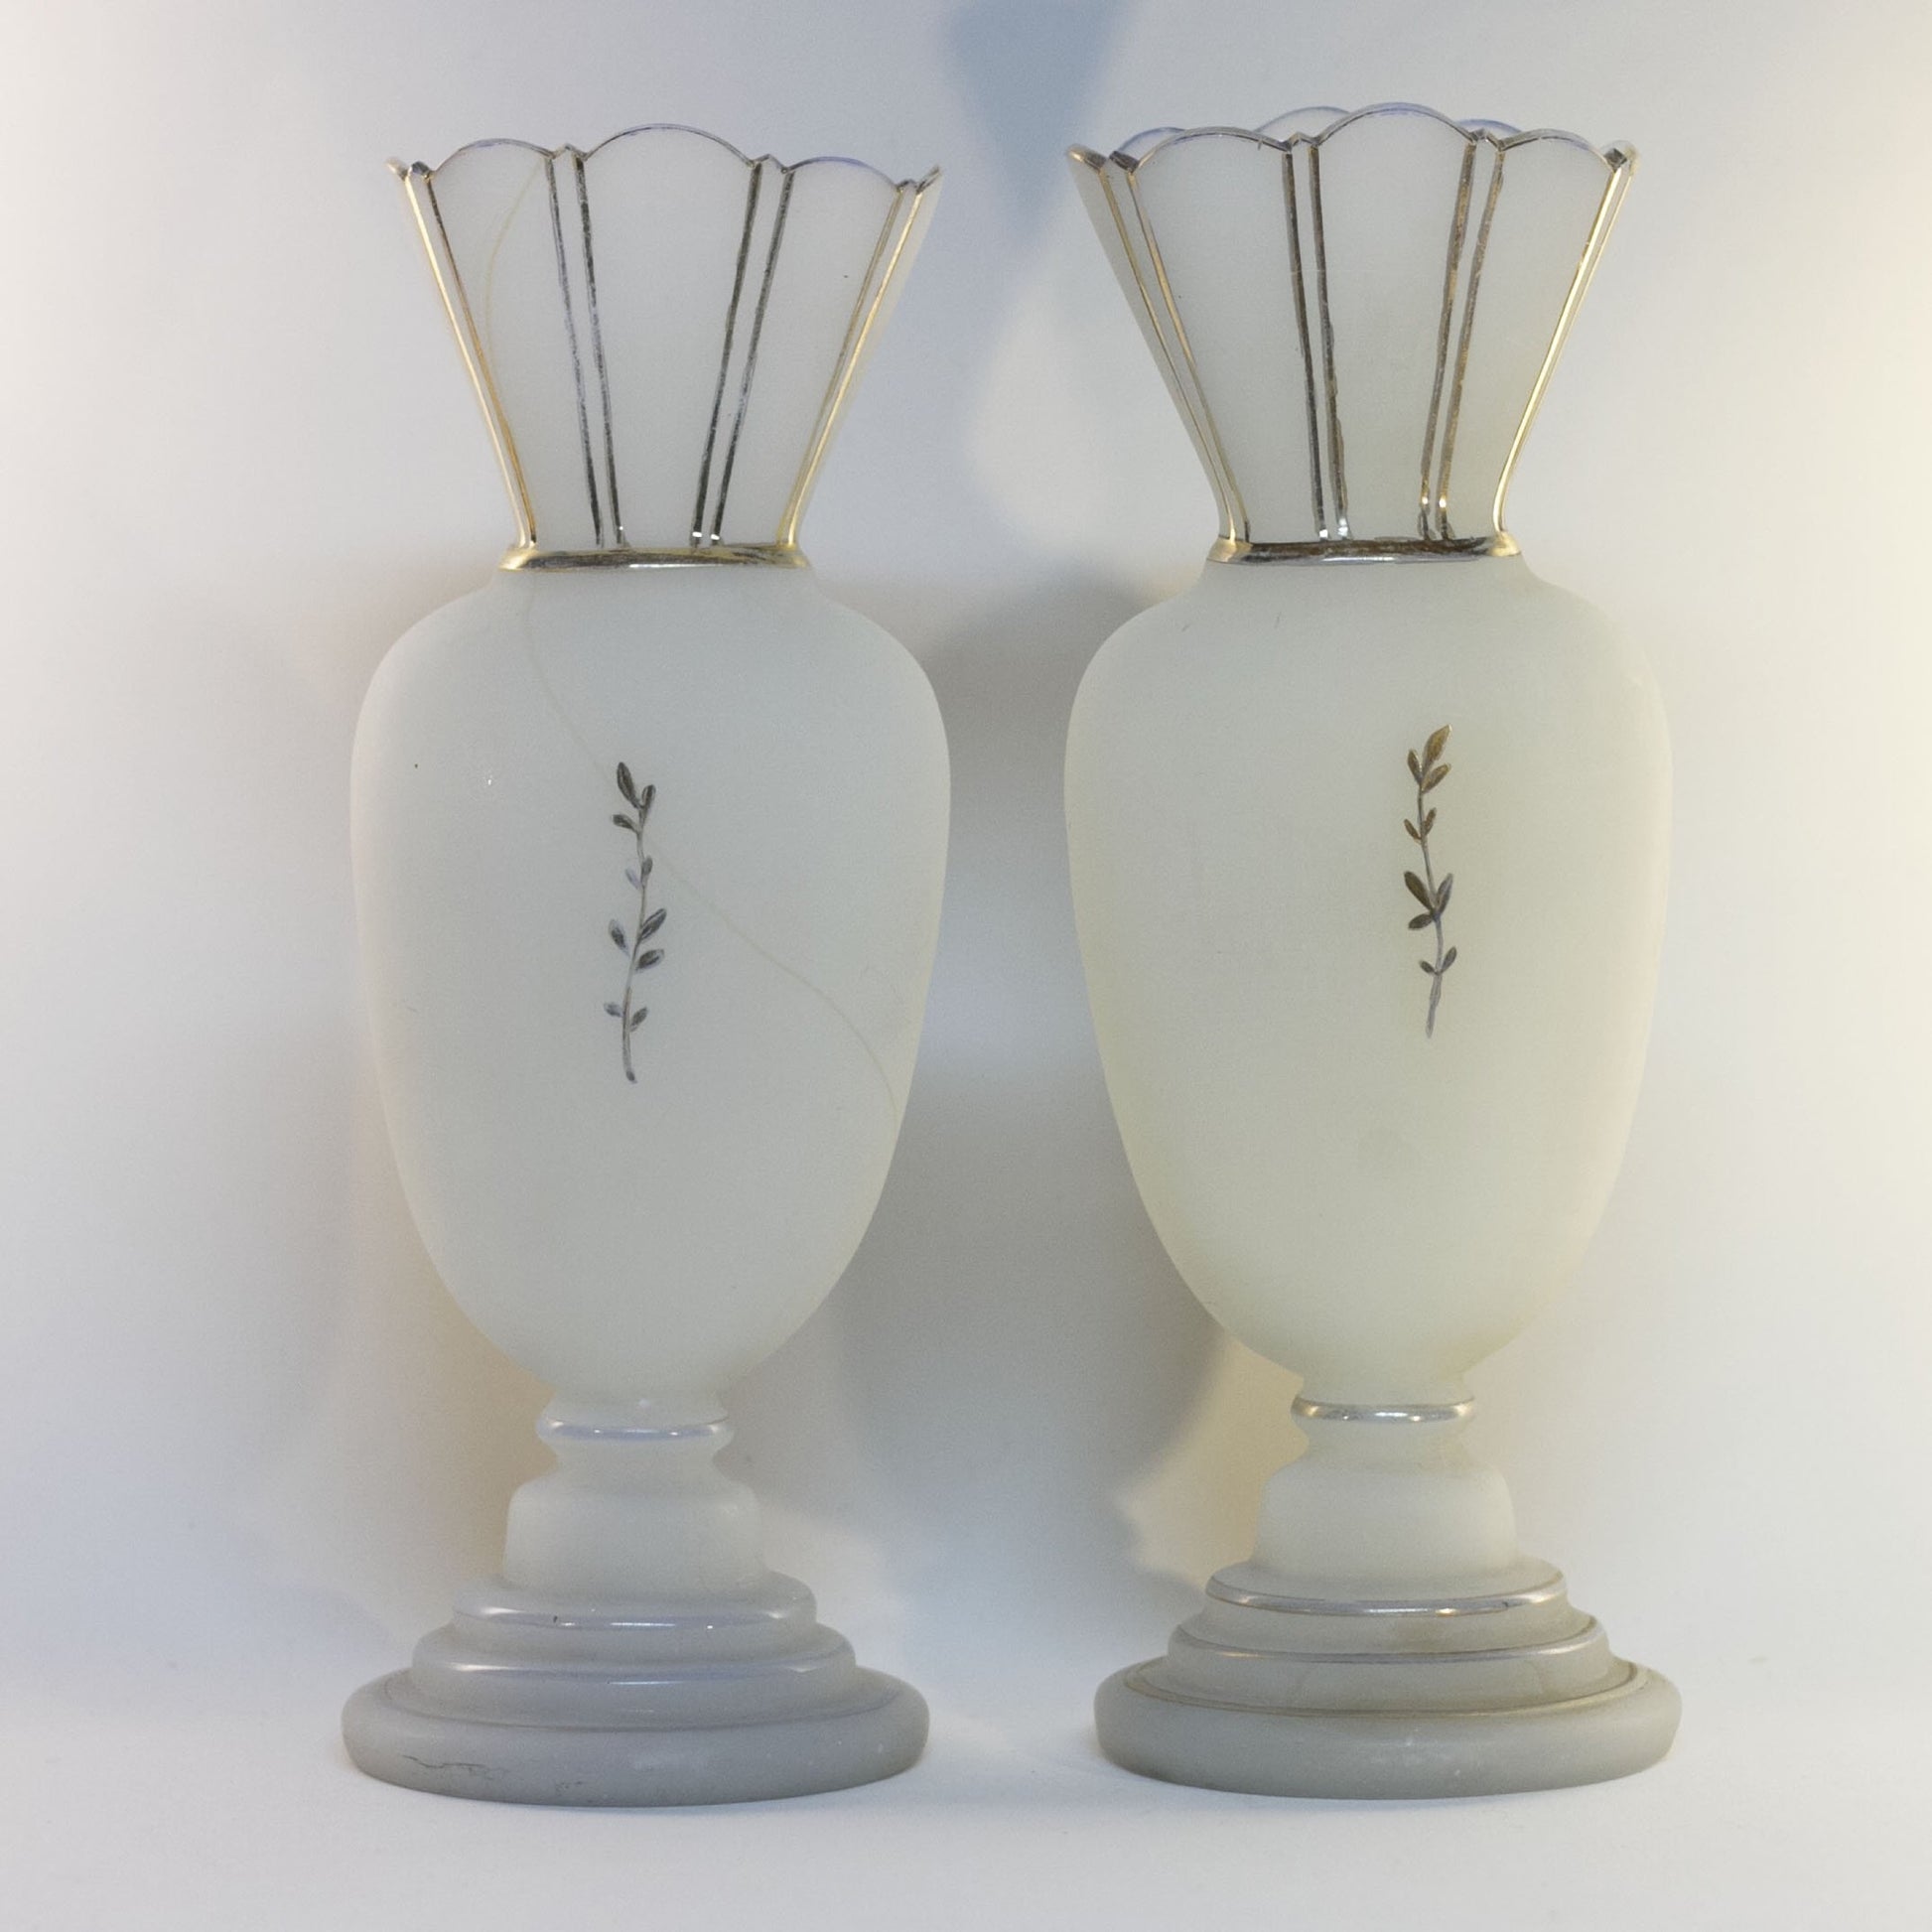 Pair of Late 19th Century Victorian Era BRISTOL GLASS WHITE MANTLE VASES Hand-Painted Cherries and Blossoms